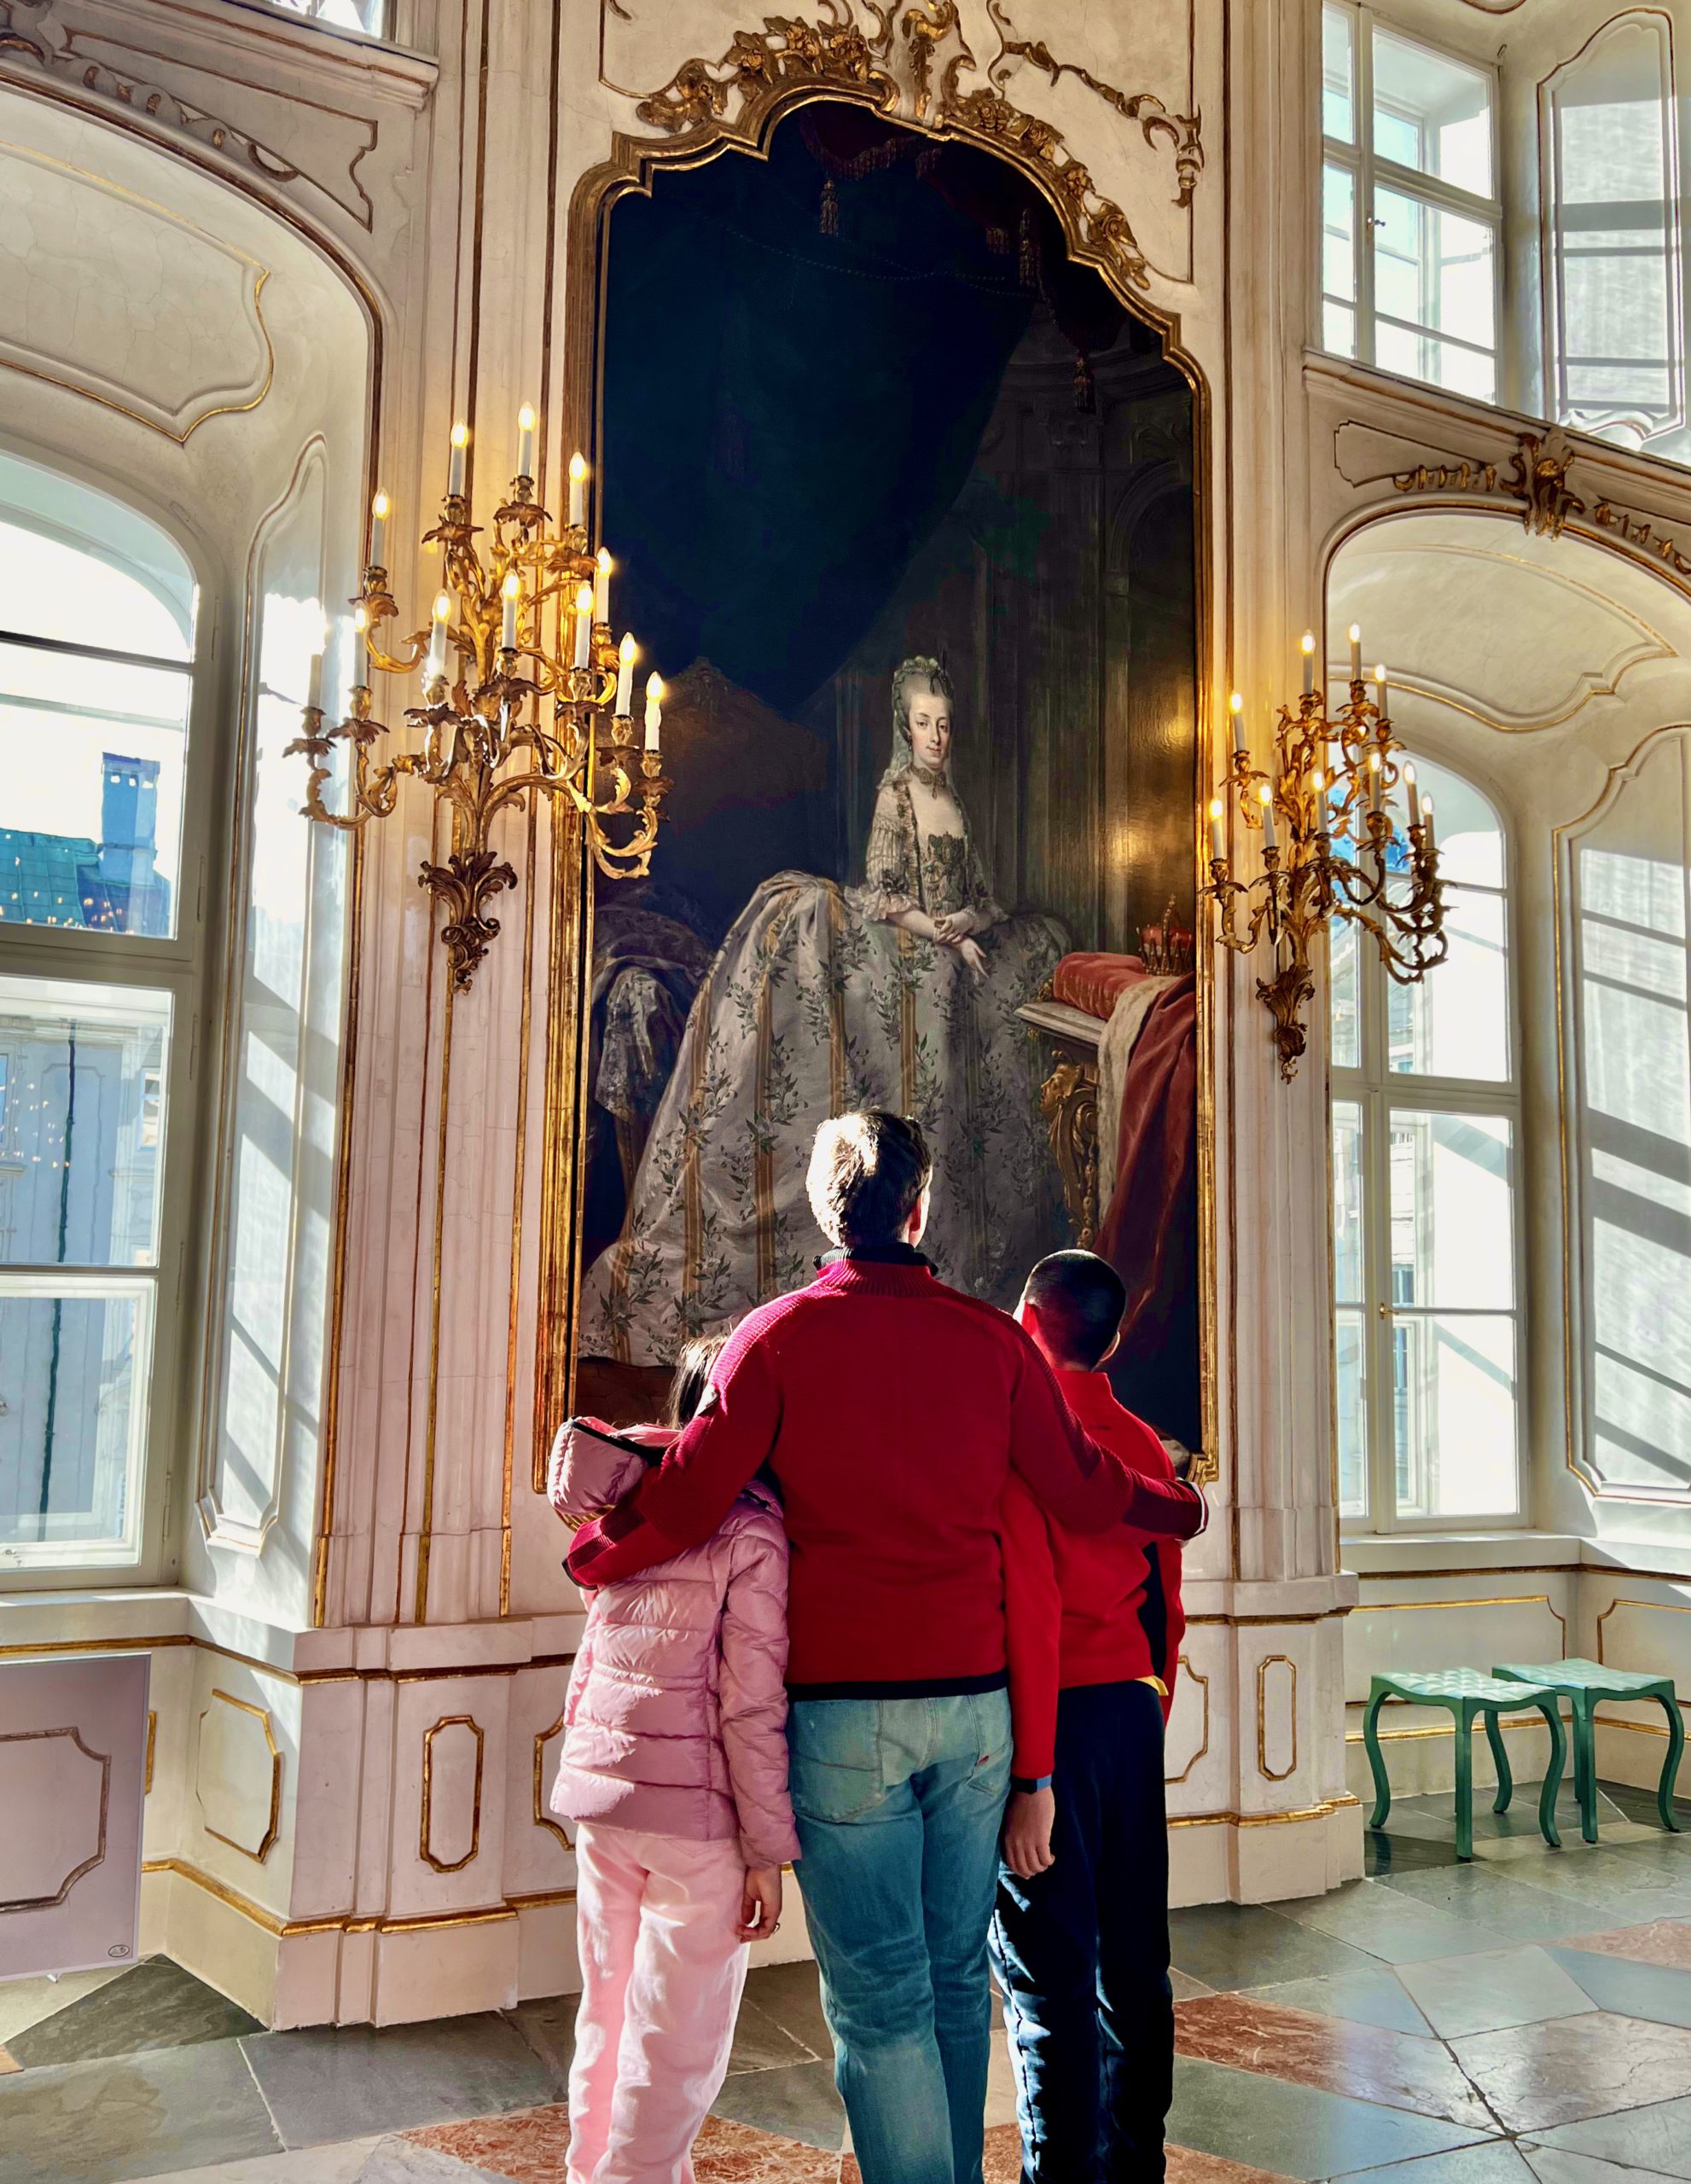 A dad and his two kids enjoy a large painting of a long-ago royal at the Imperial Palace, one of the best things to do in Innsbruck with kids this winter.